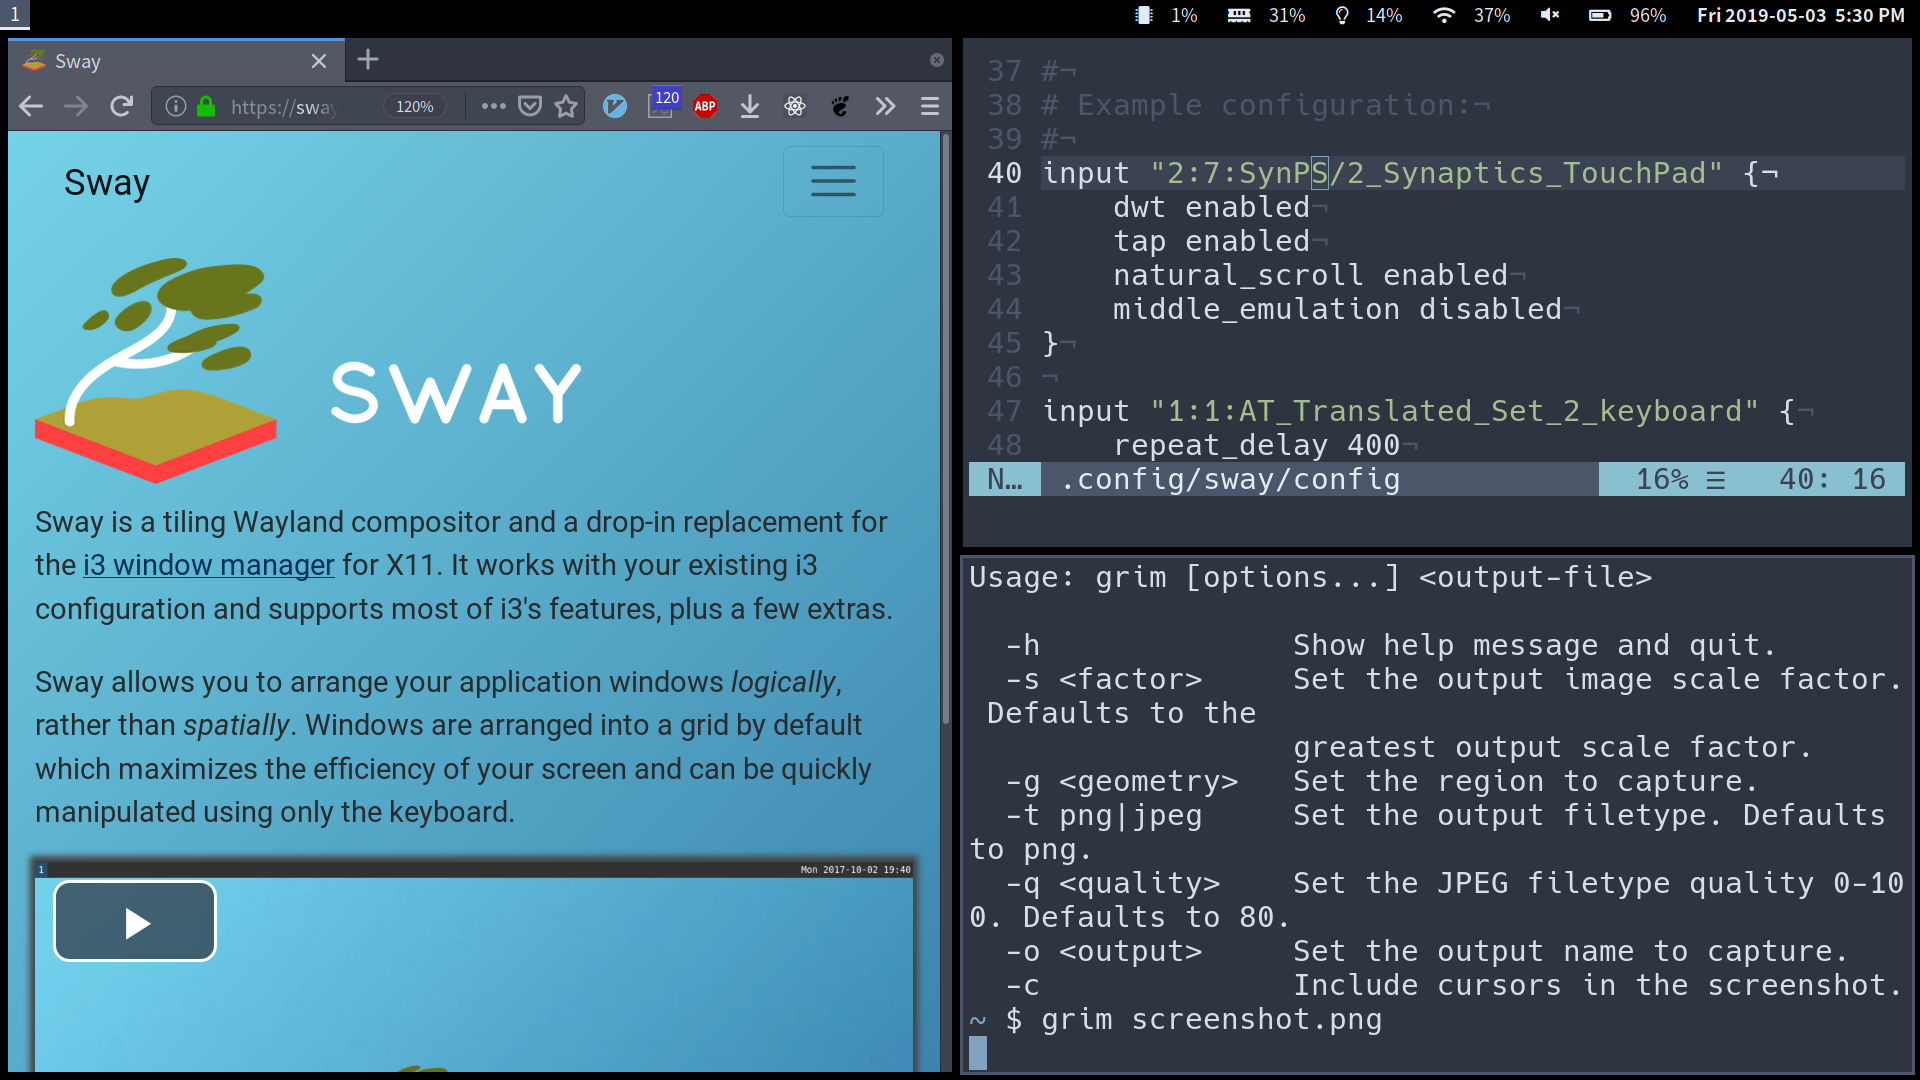 Sway overview